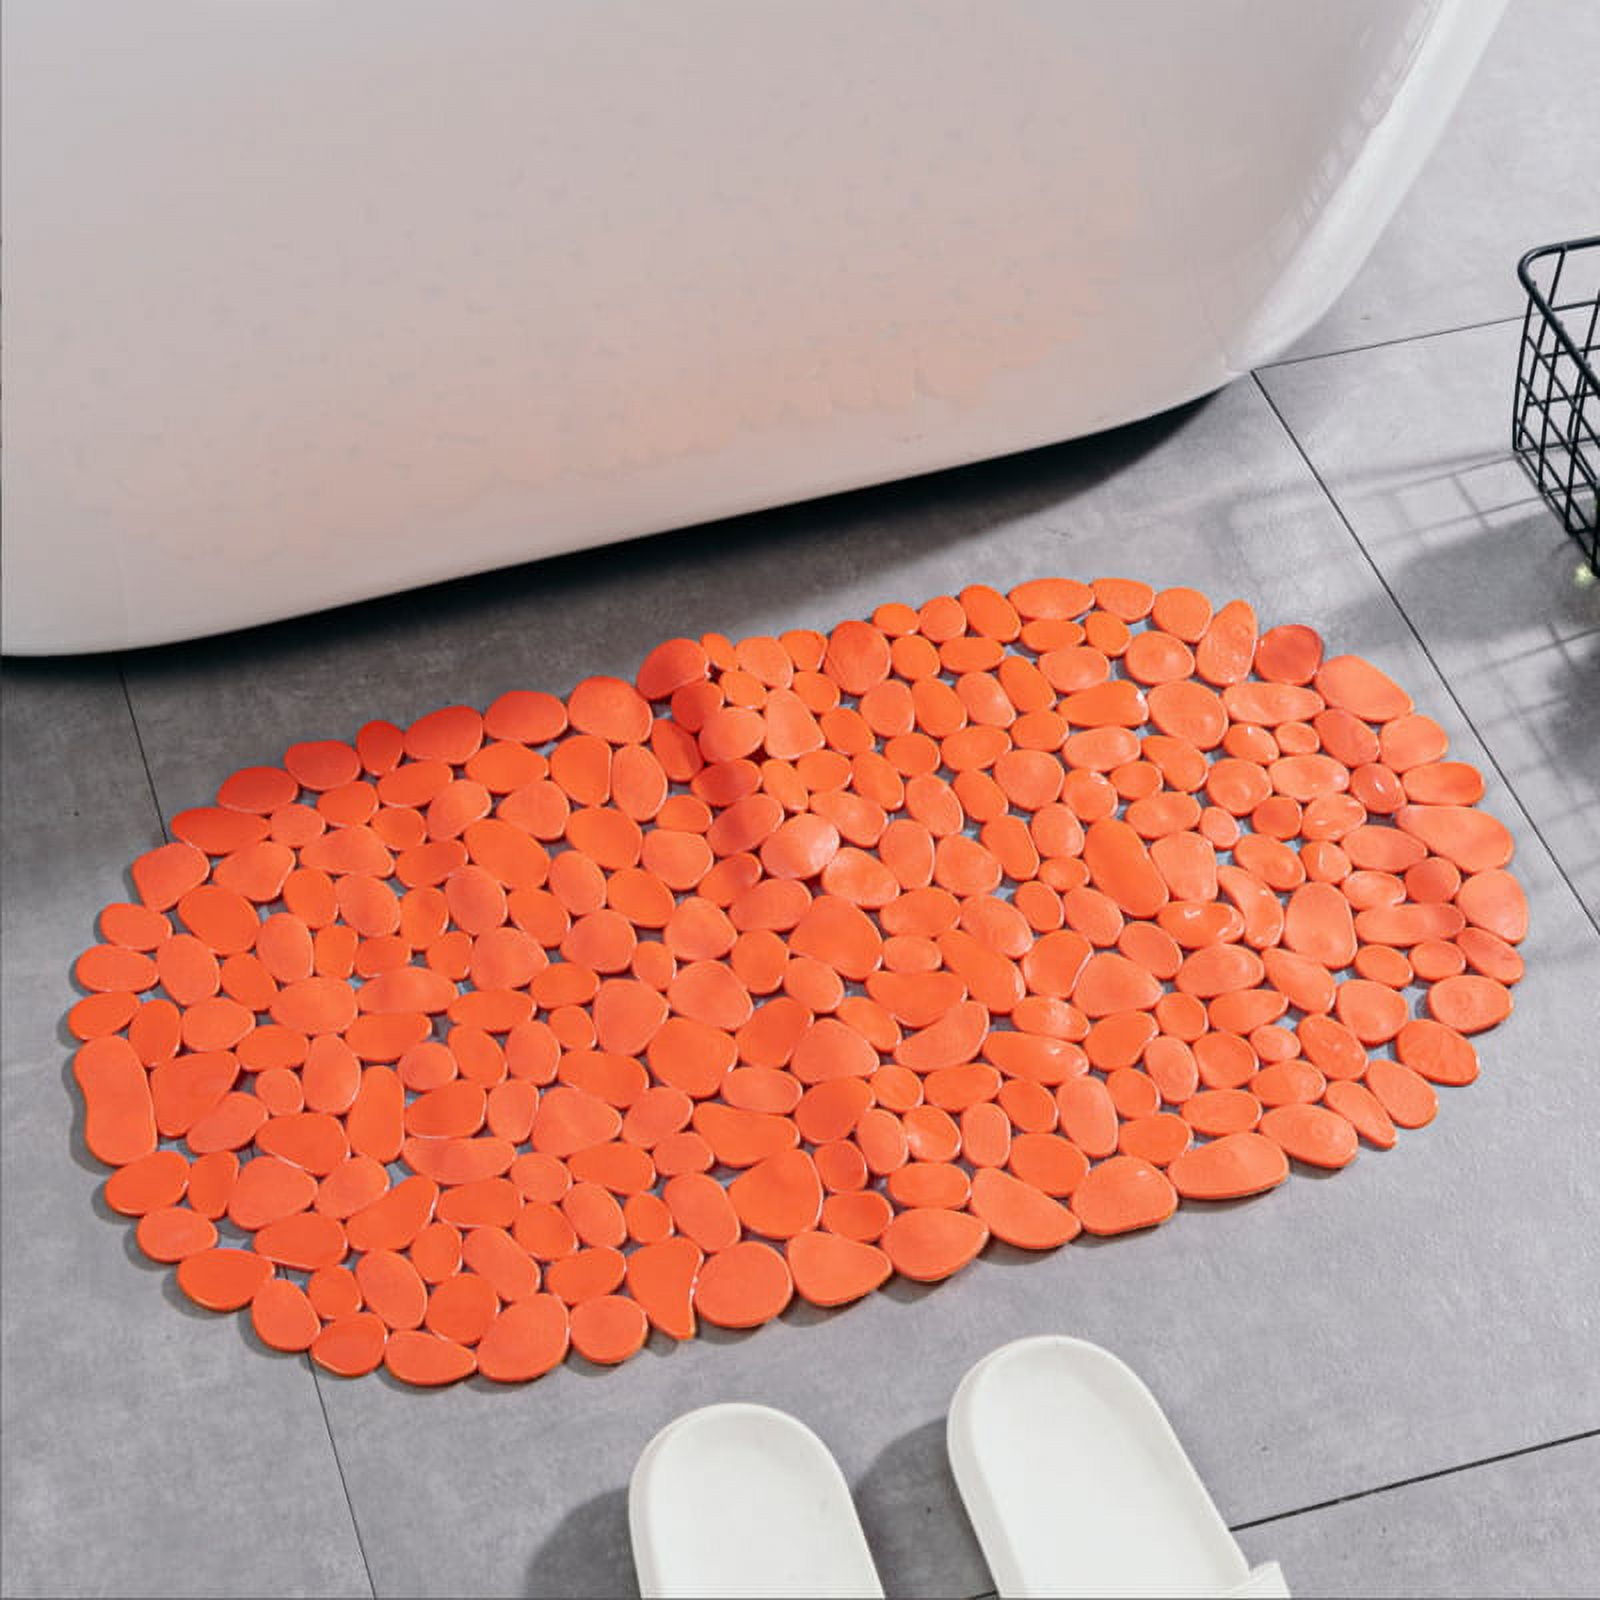 Apricot Colored Soft And Safe Silicone Anti-slip Bath Mat For